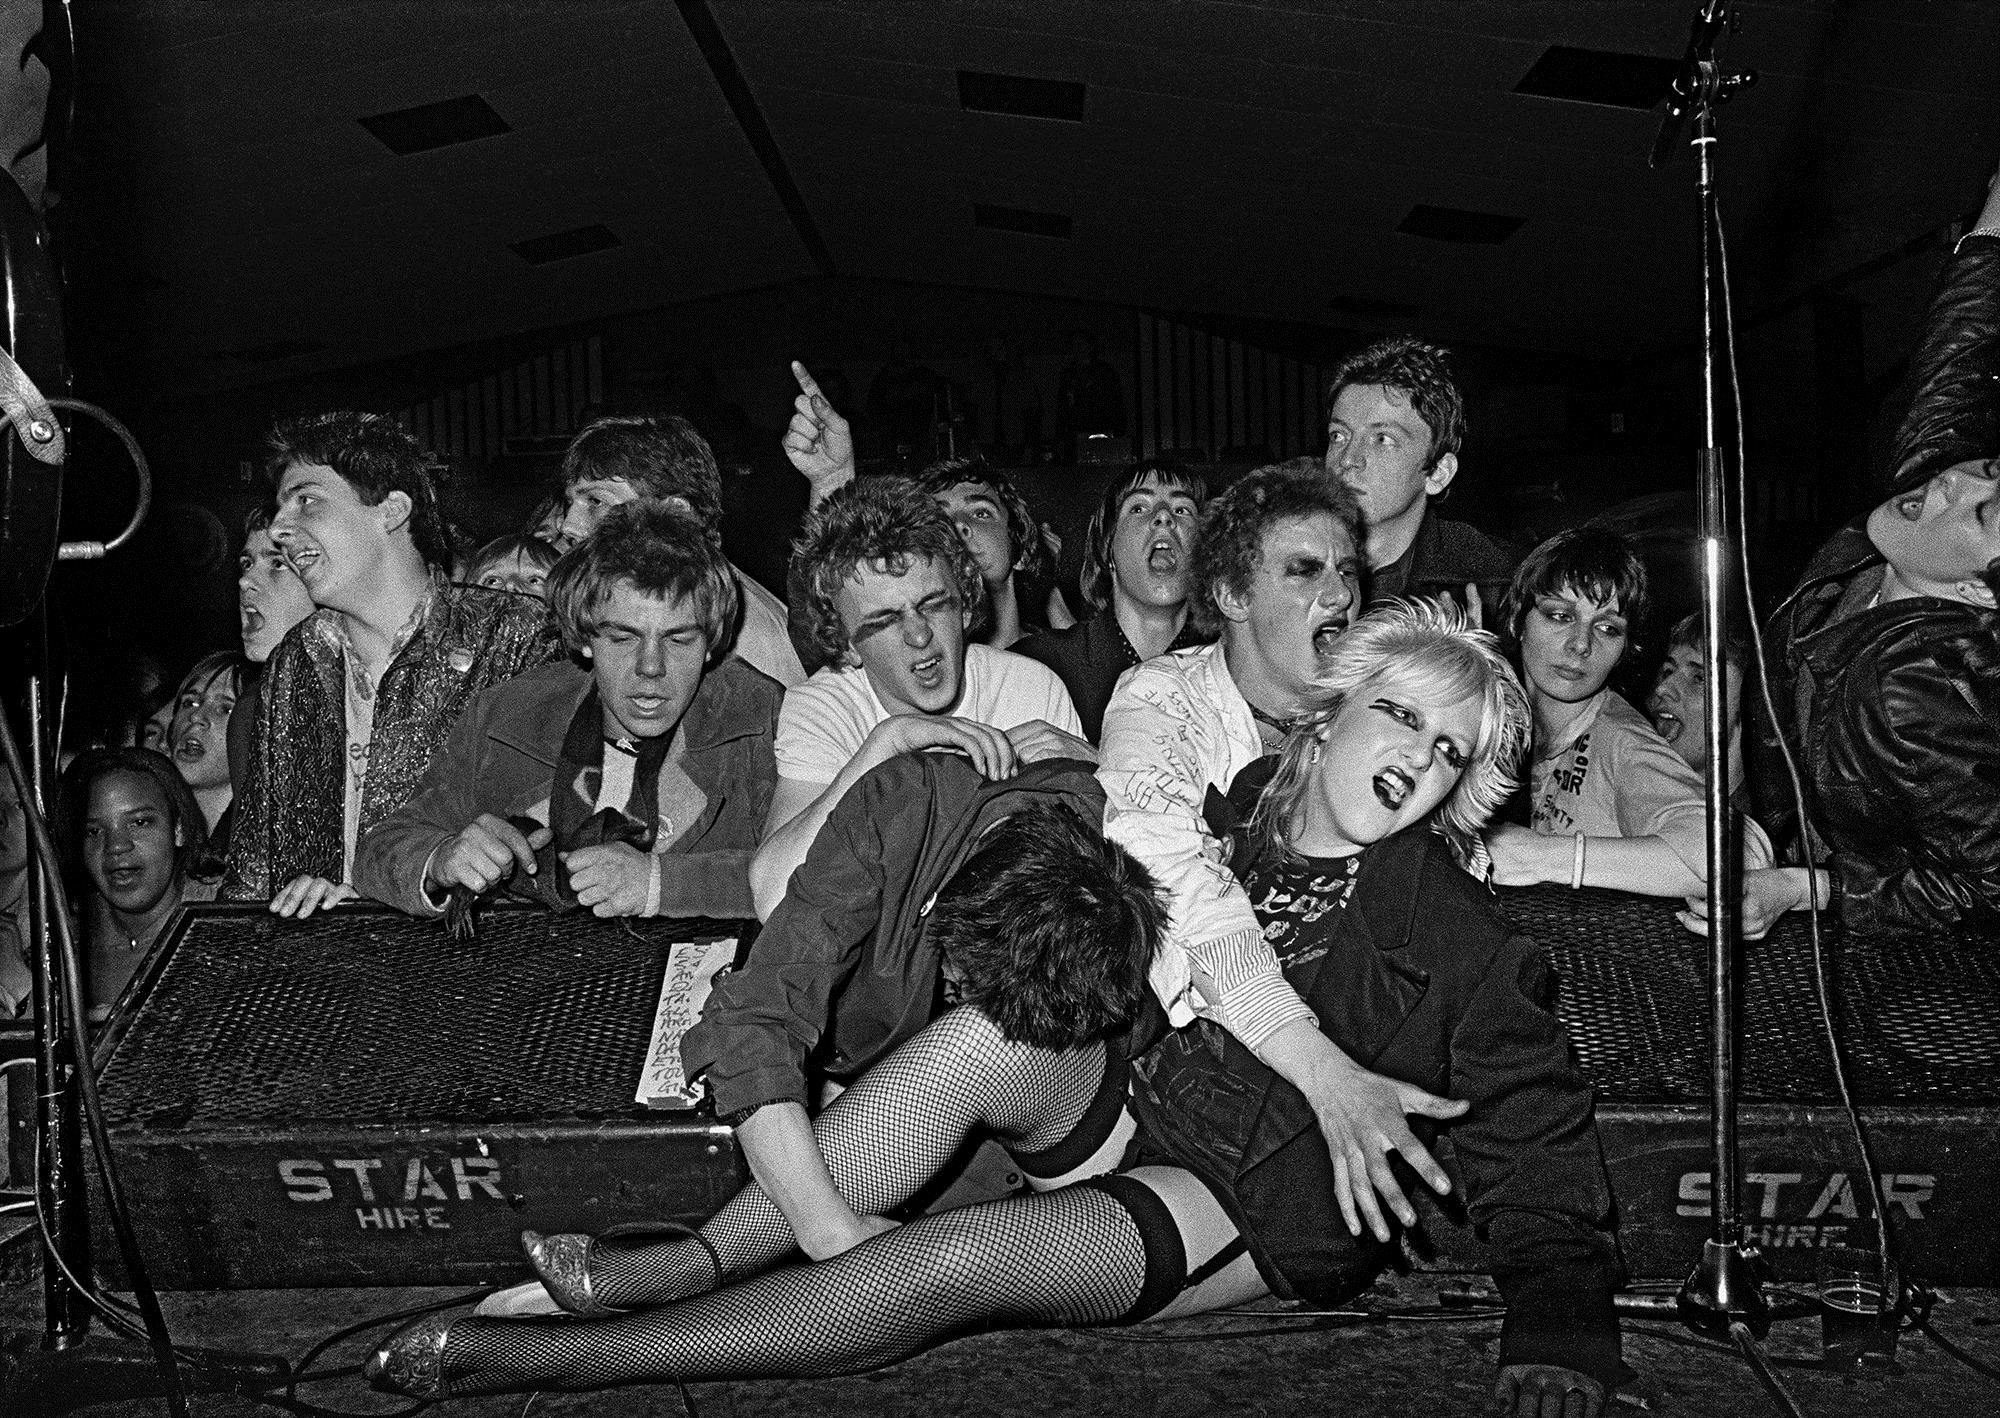 Punk girl in fishnets and suspenders reclining between two monitors up on stage with other members of the gig audience behind and around her. Photo taken 1976.